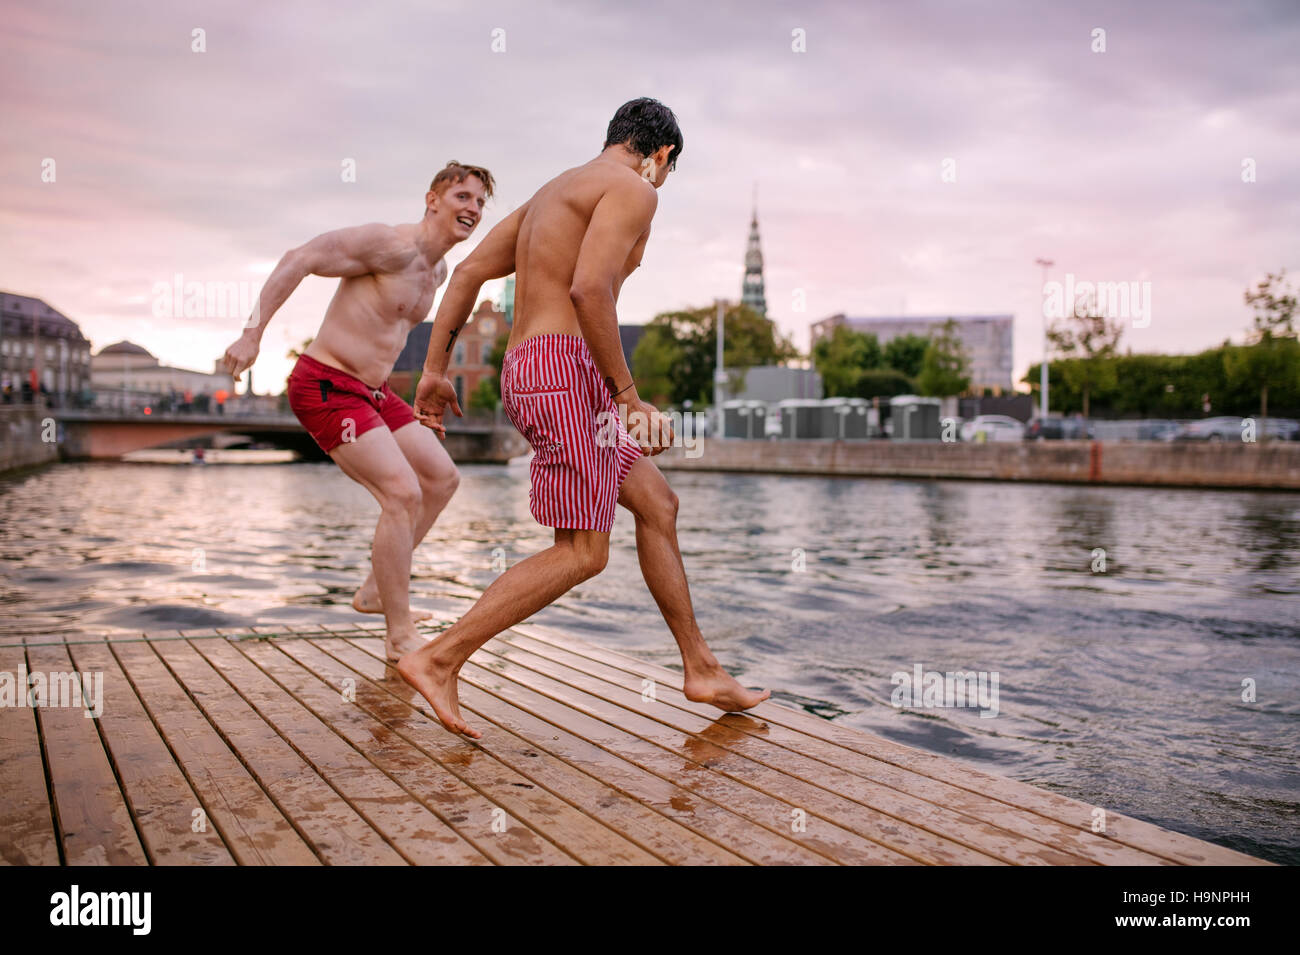 Young friends about to jump into the lake. Young men running on a jetty. Stock Photo